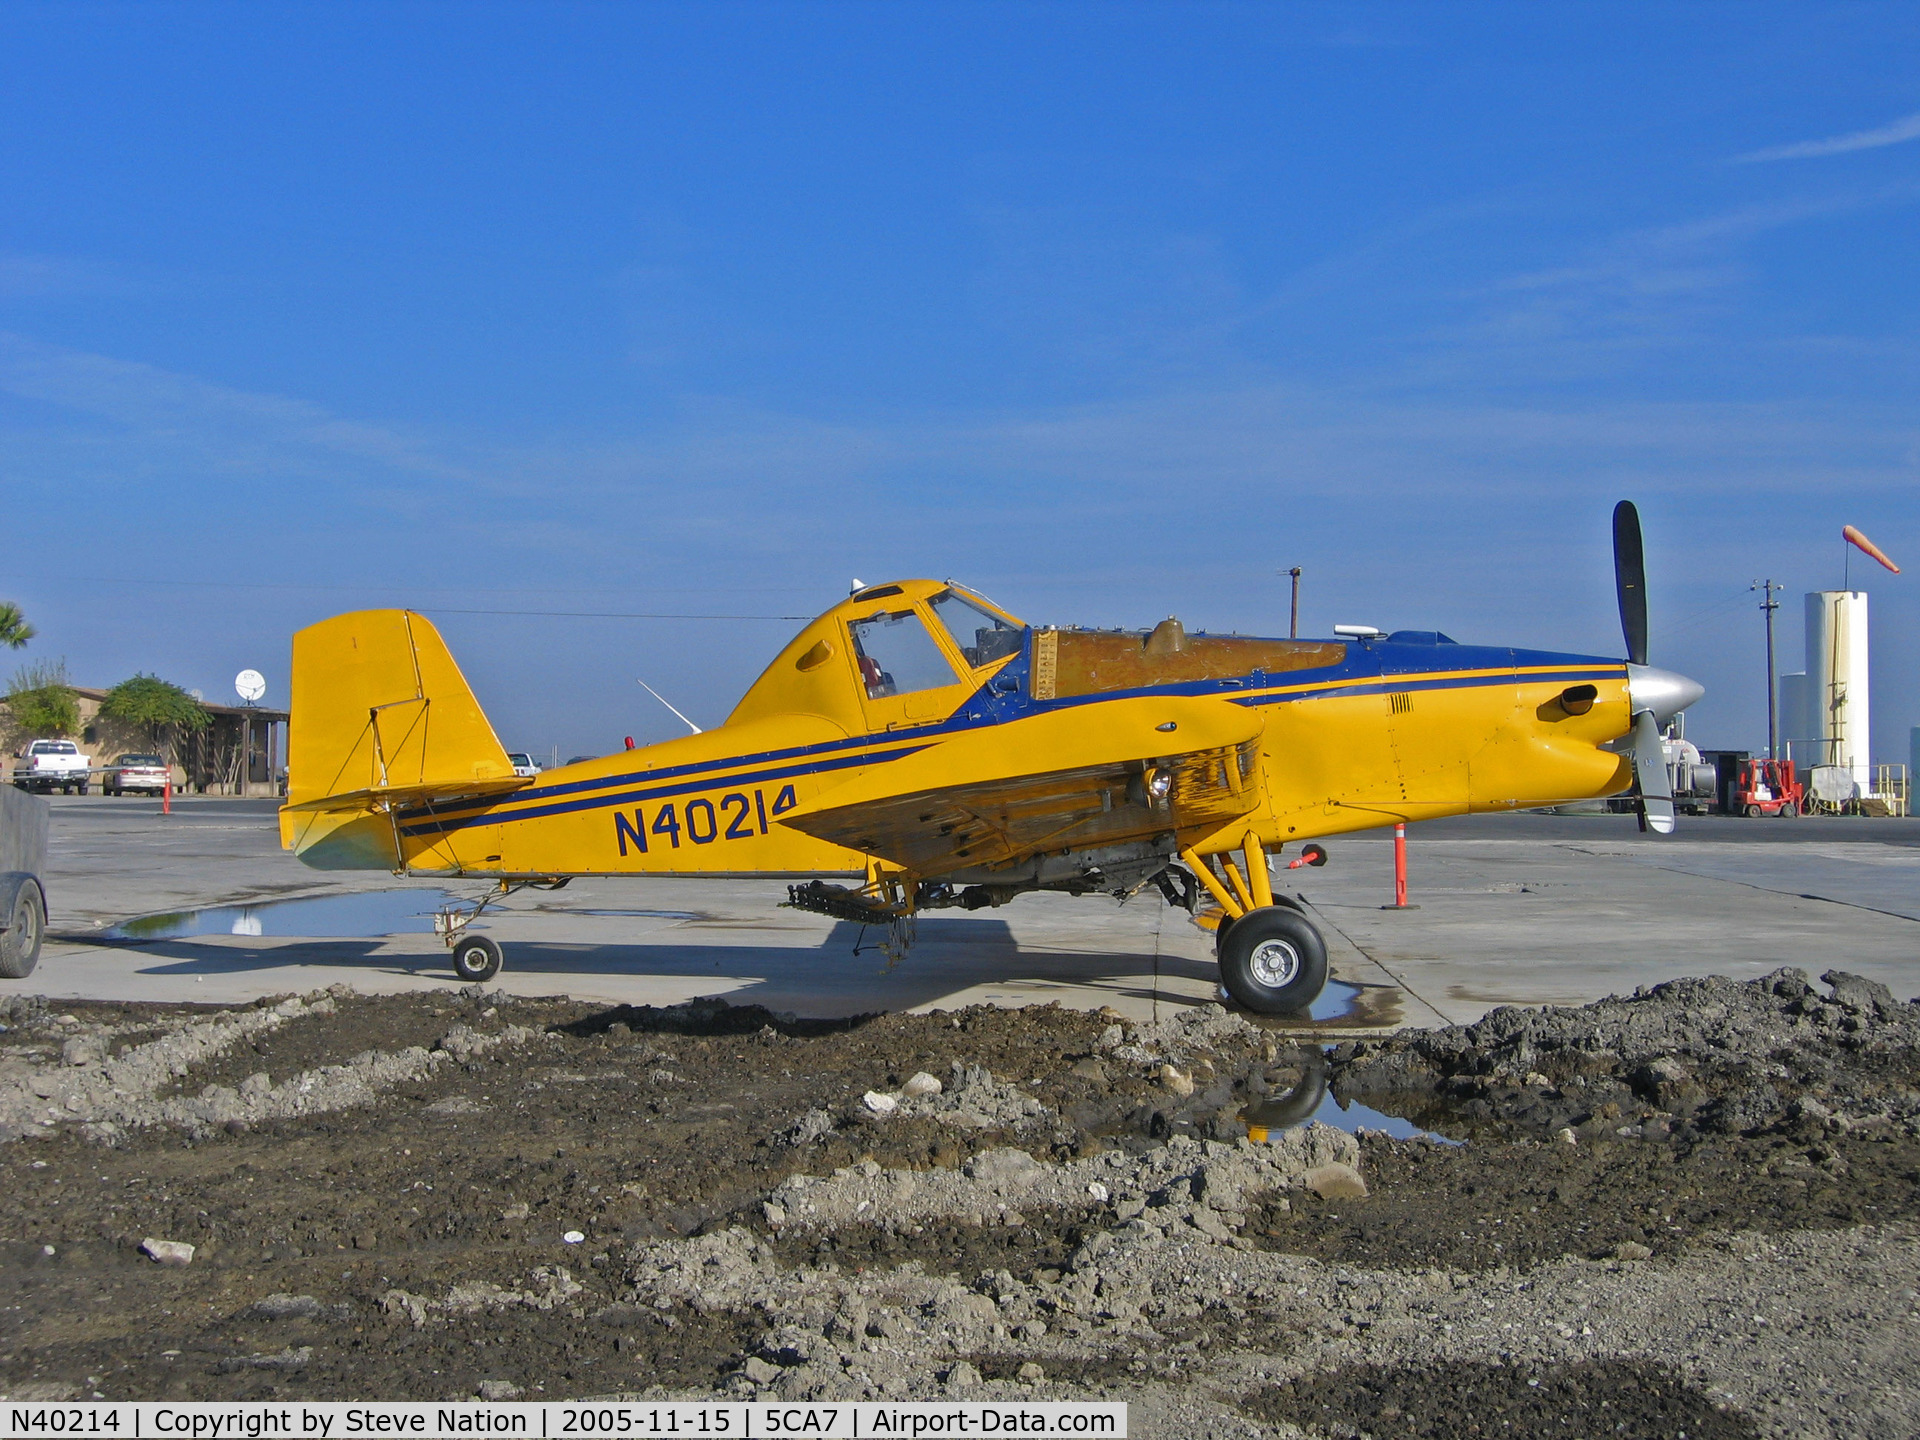 N40214, 1980 Ayres S2R-T34 Thrush C/N T34-032, American West Aviation 1980 Ayres S2T-34 rigged for spraying @ AWA airstrip NE of Five Points, CA